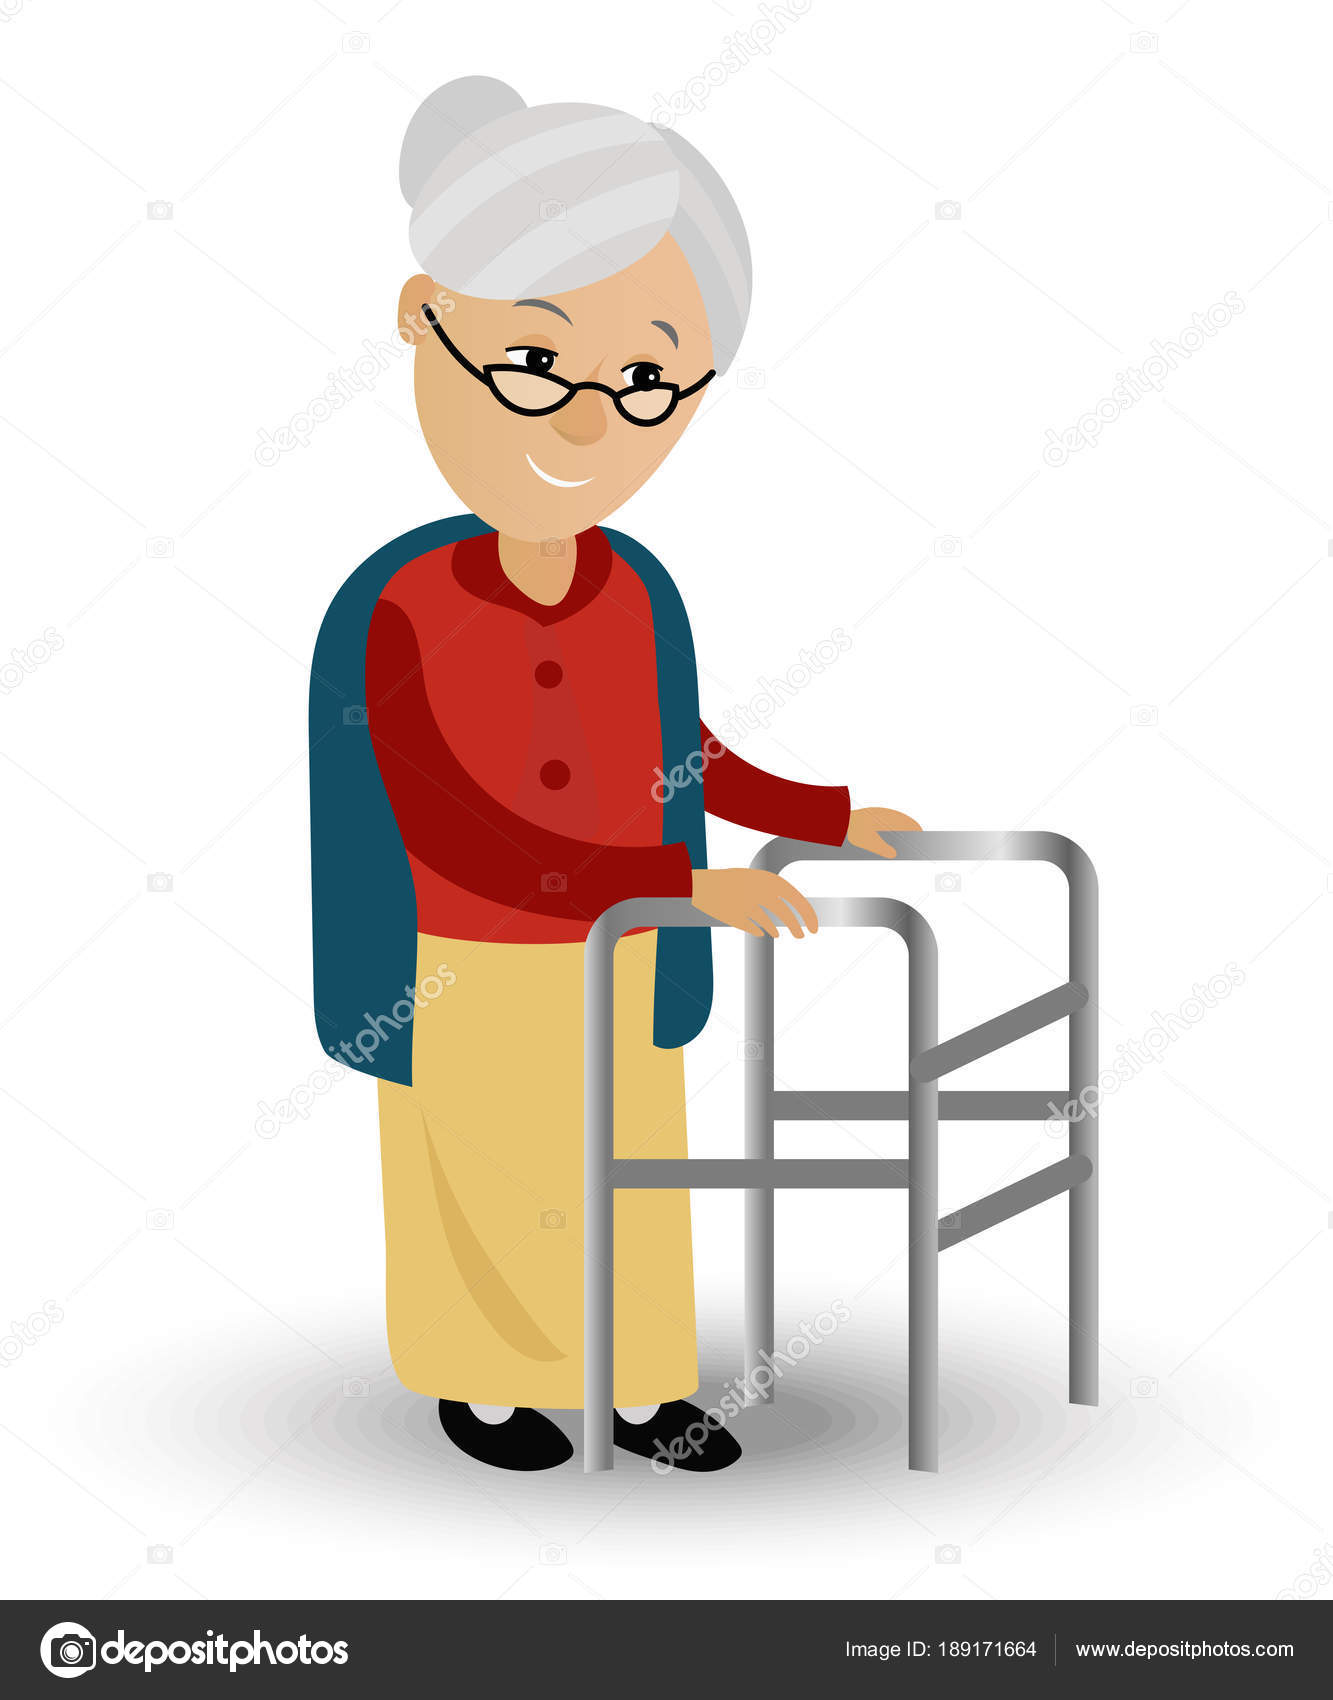 Old age home Vector Art Stock Images | Depositphotos